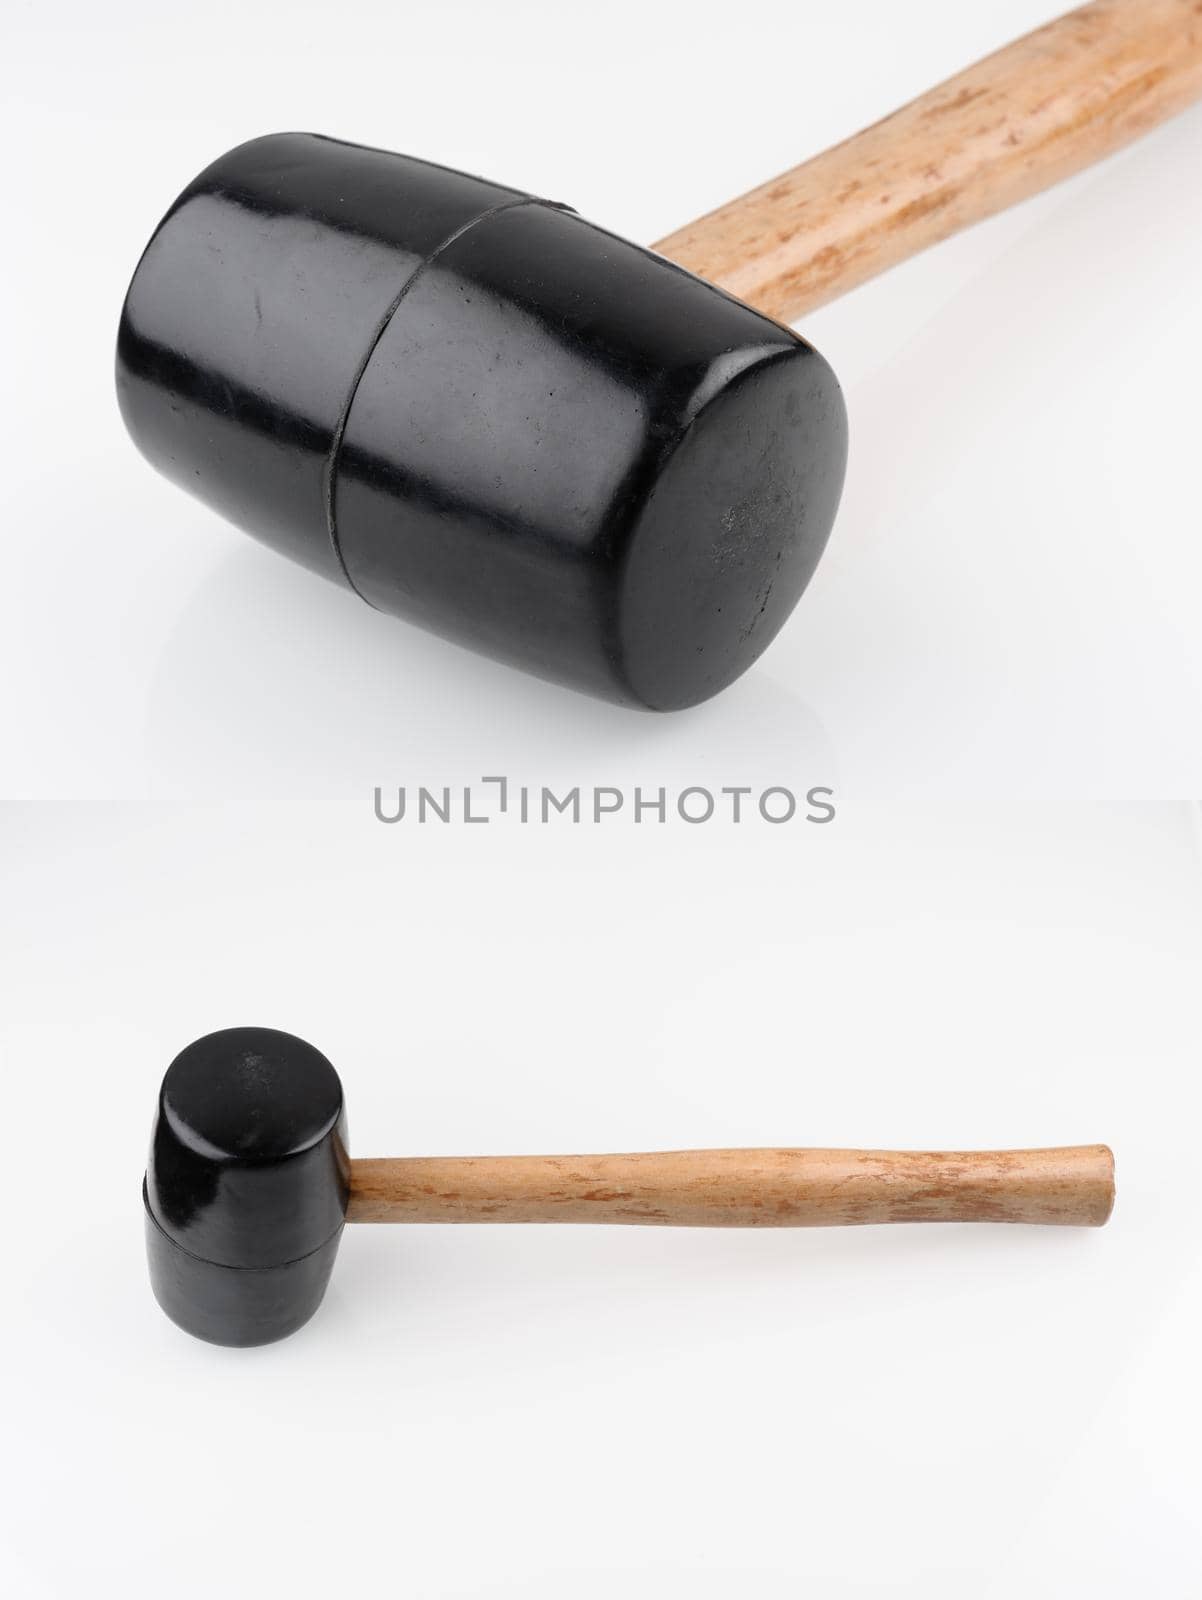 The mallet for leather working